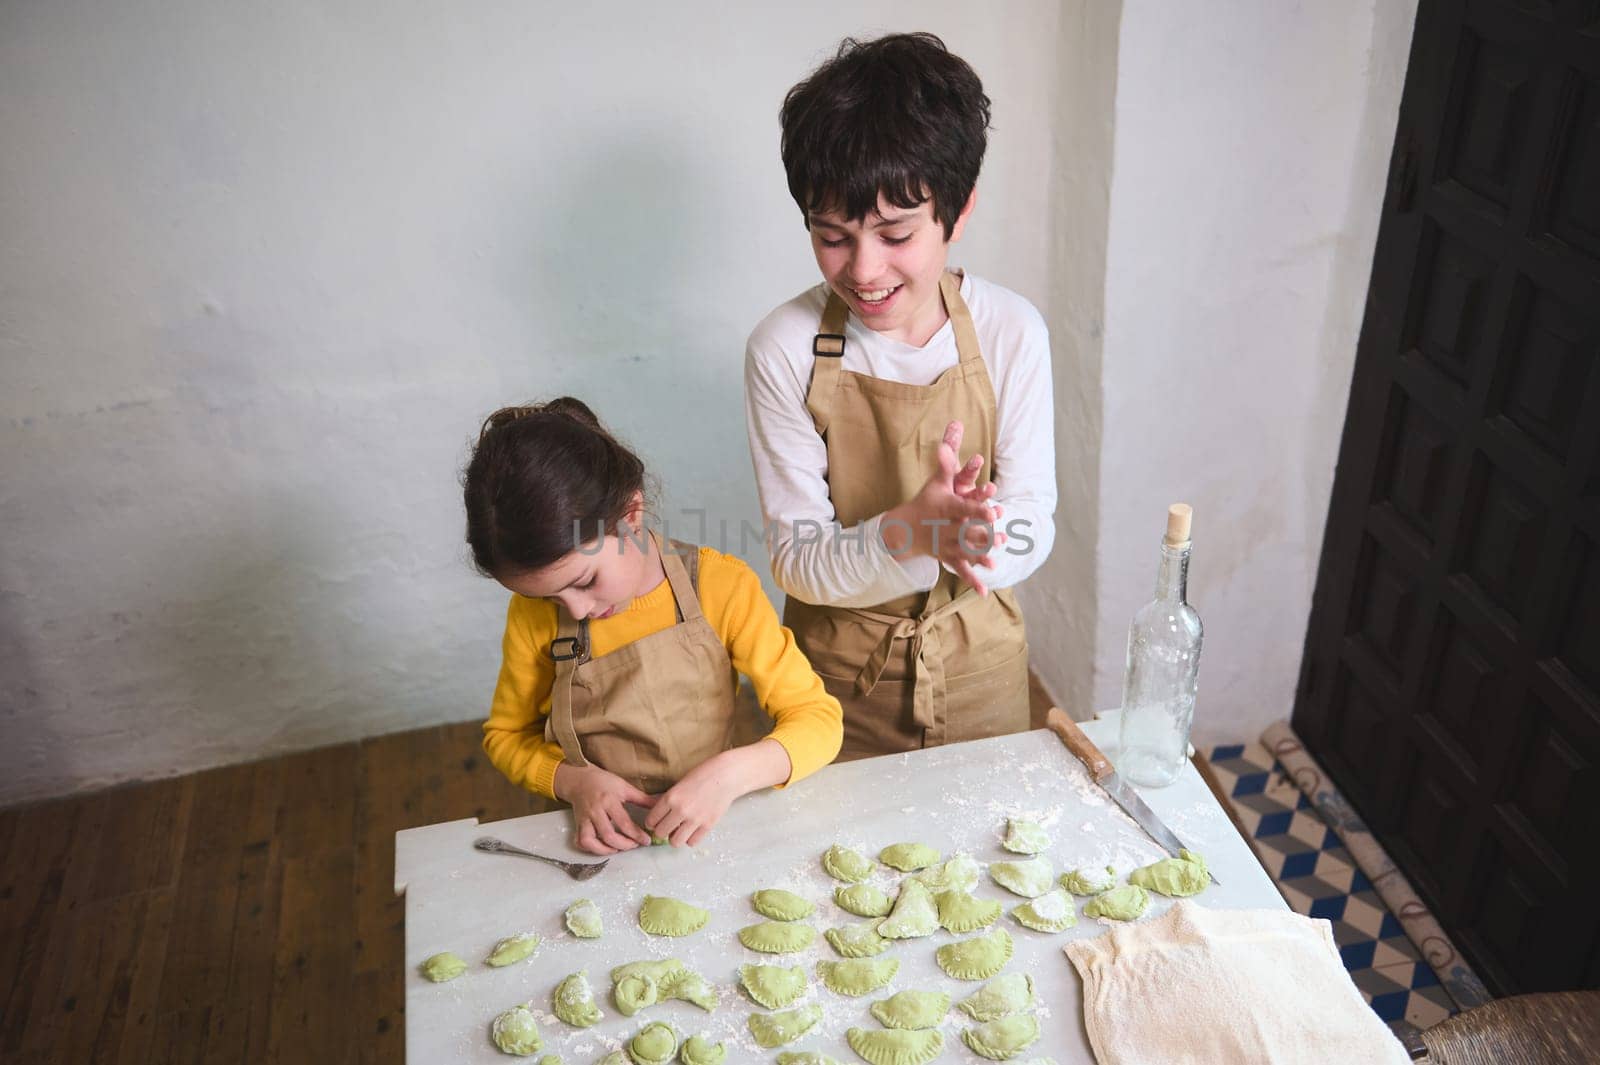 Cooking class for kids. Two kids, boy and girl preparing family dinner, standing at floured kitchen table and modeling dumplings or Ukrainian varennyky in the rural house kitchen interior. Top view by artgf